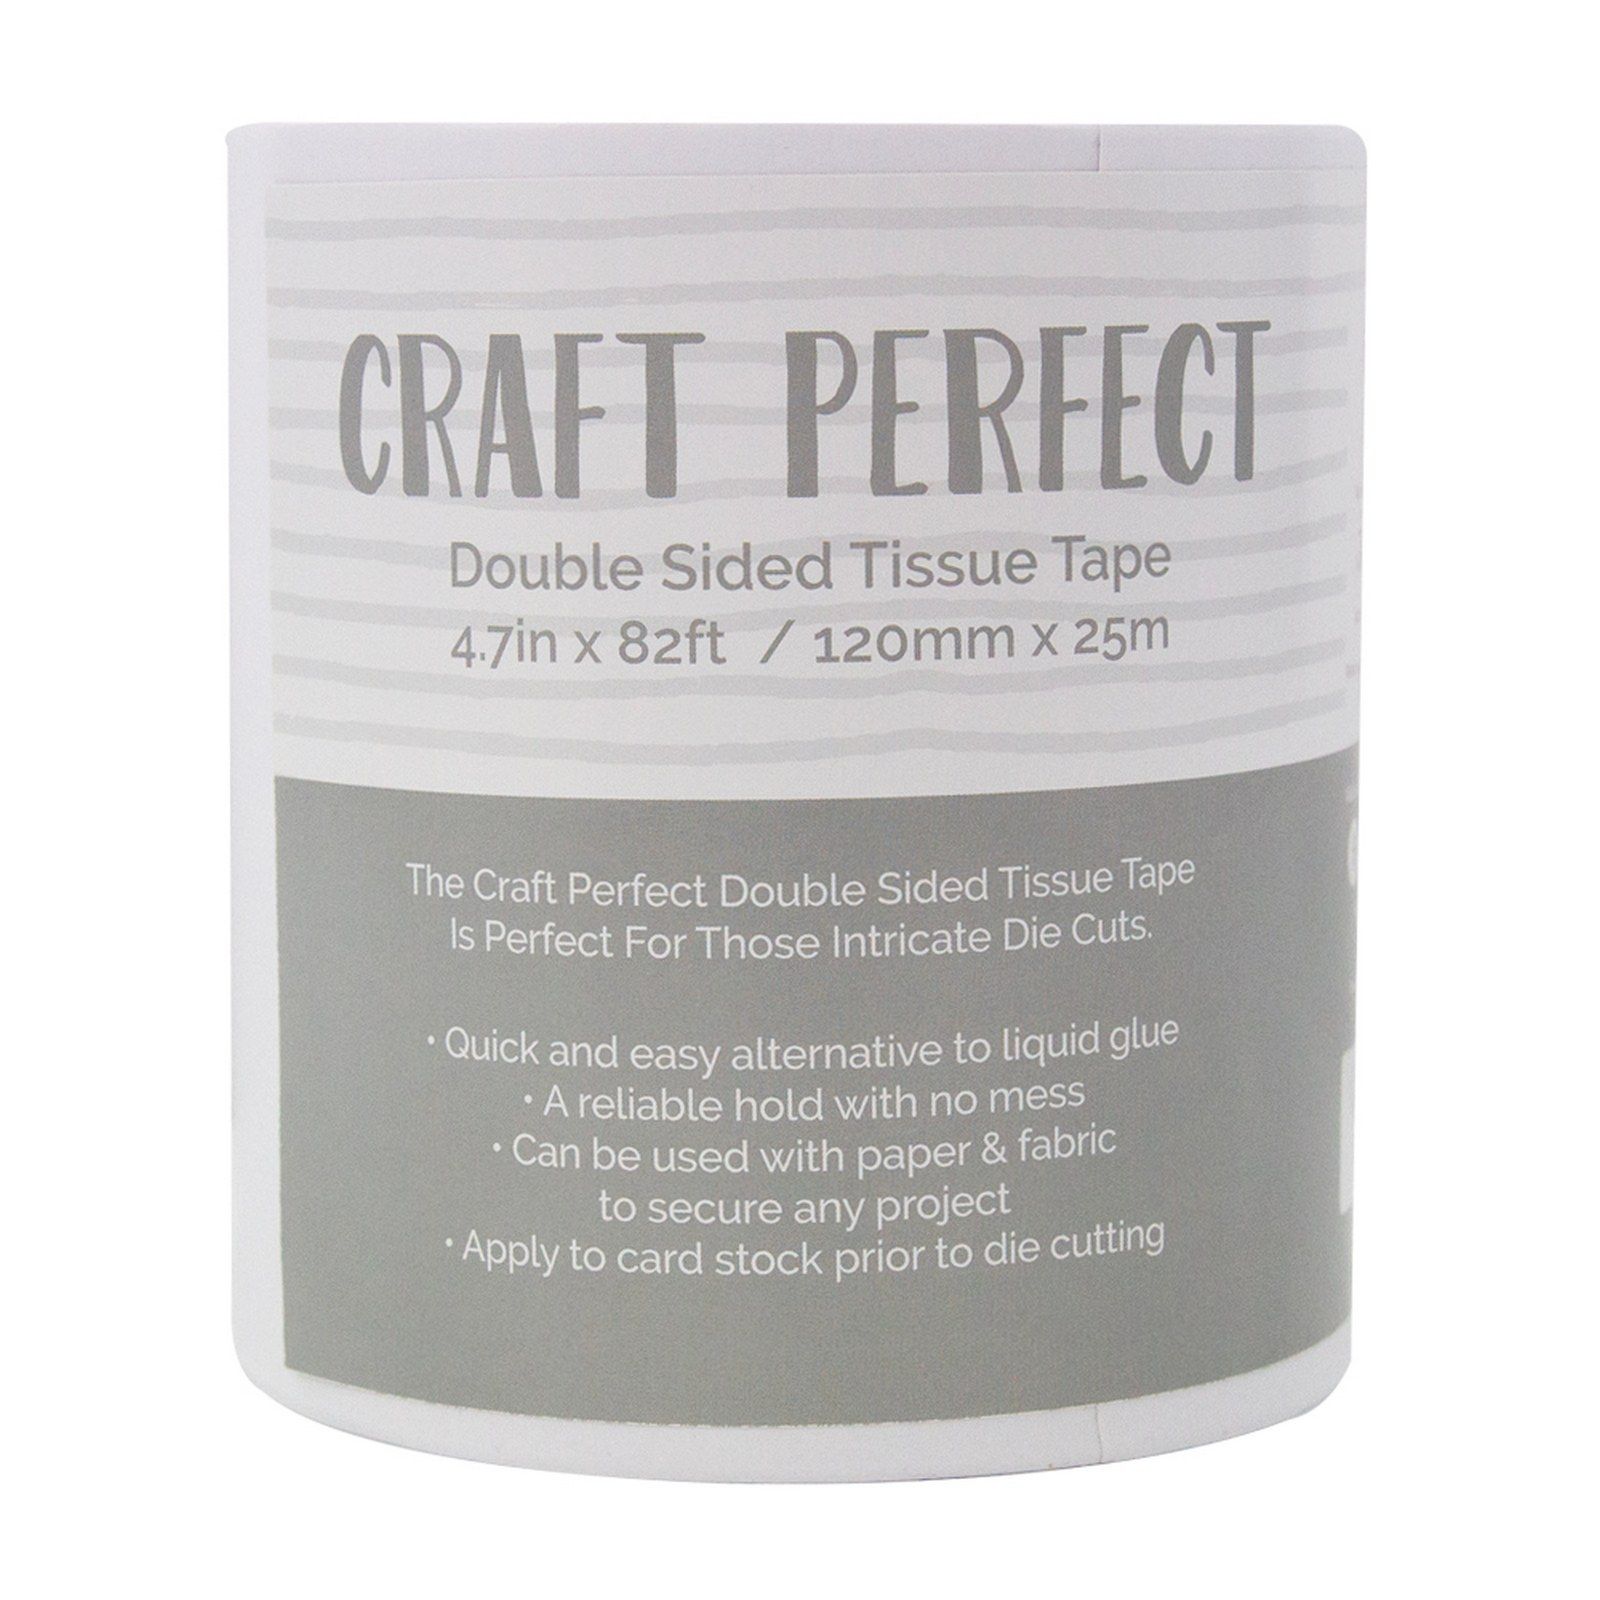 Craft Perfect • Double-sided Tissue Tape 25mx120mm